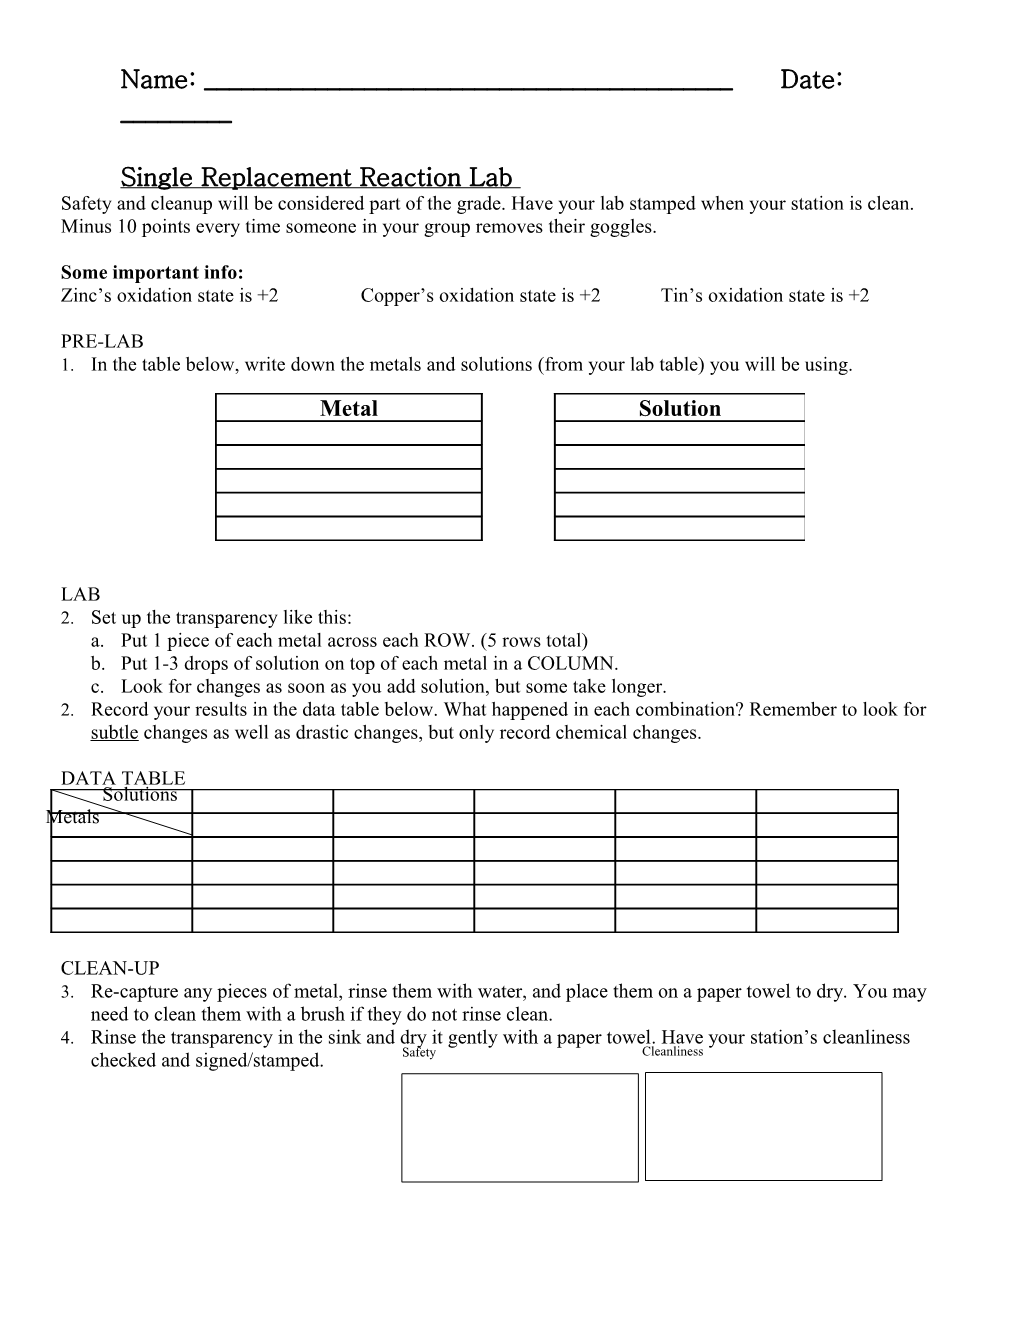 Single Replacement Reaction Lab